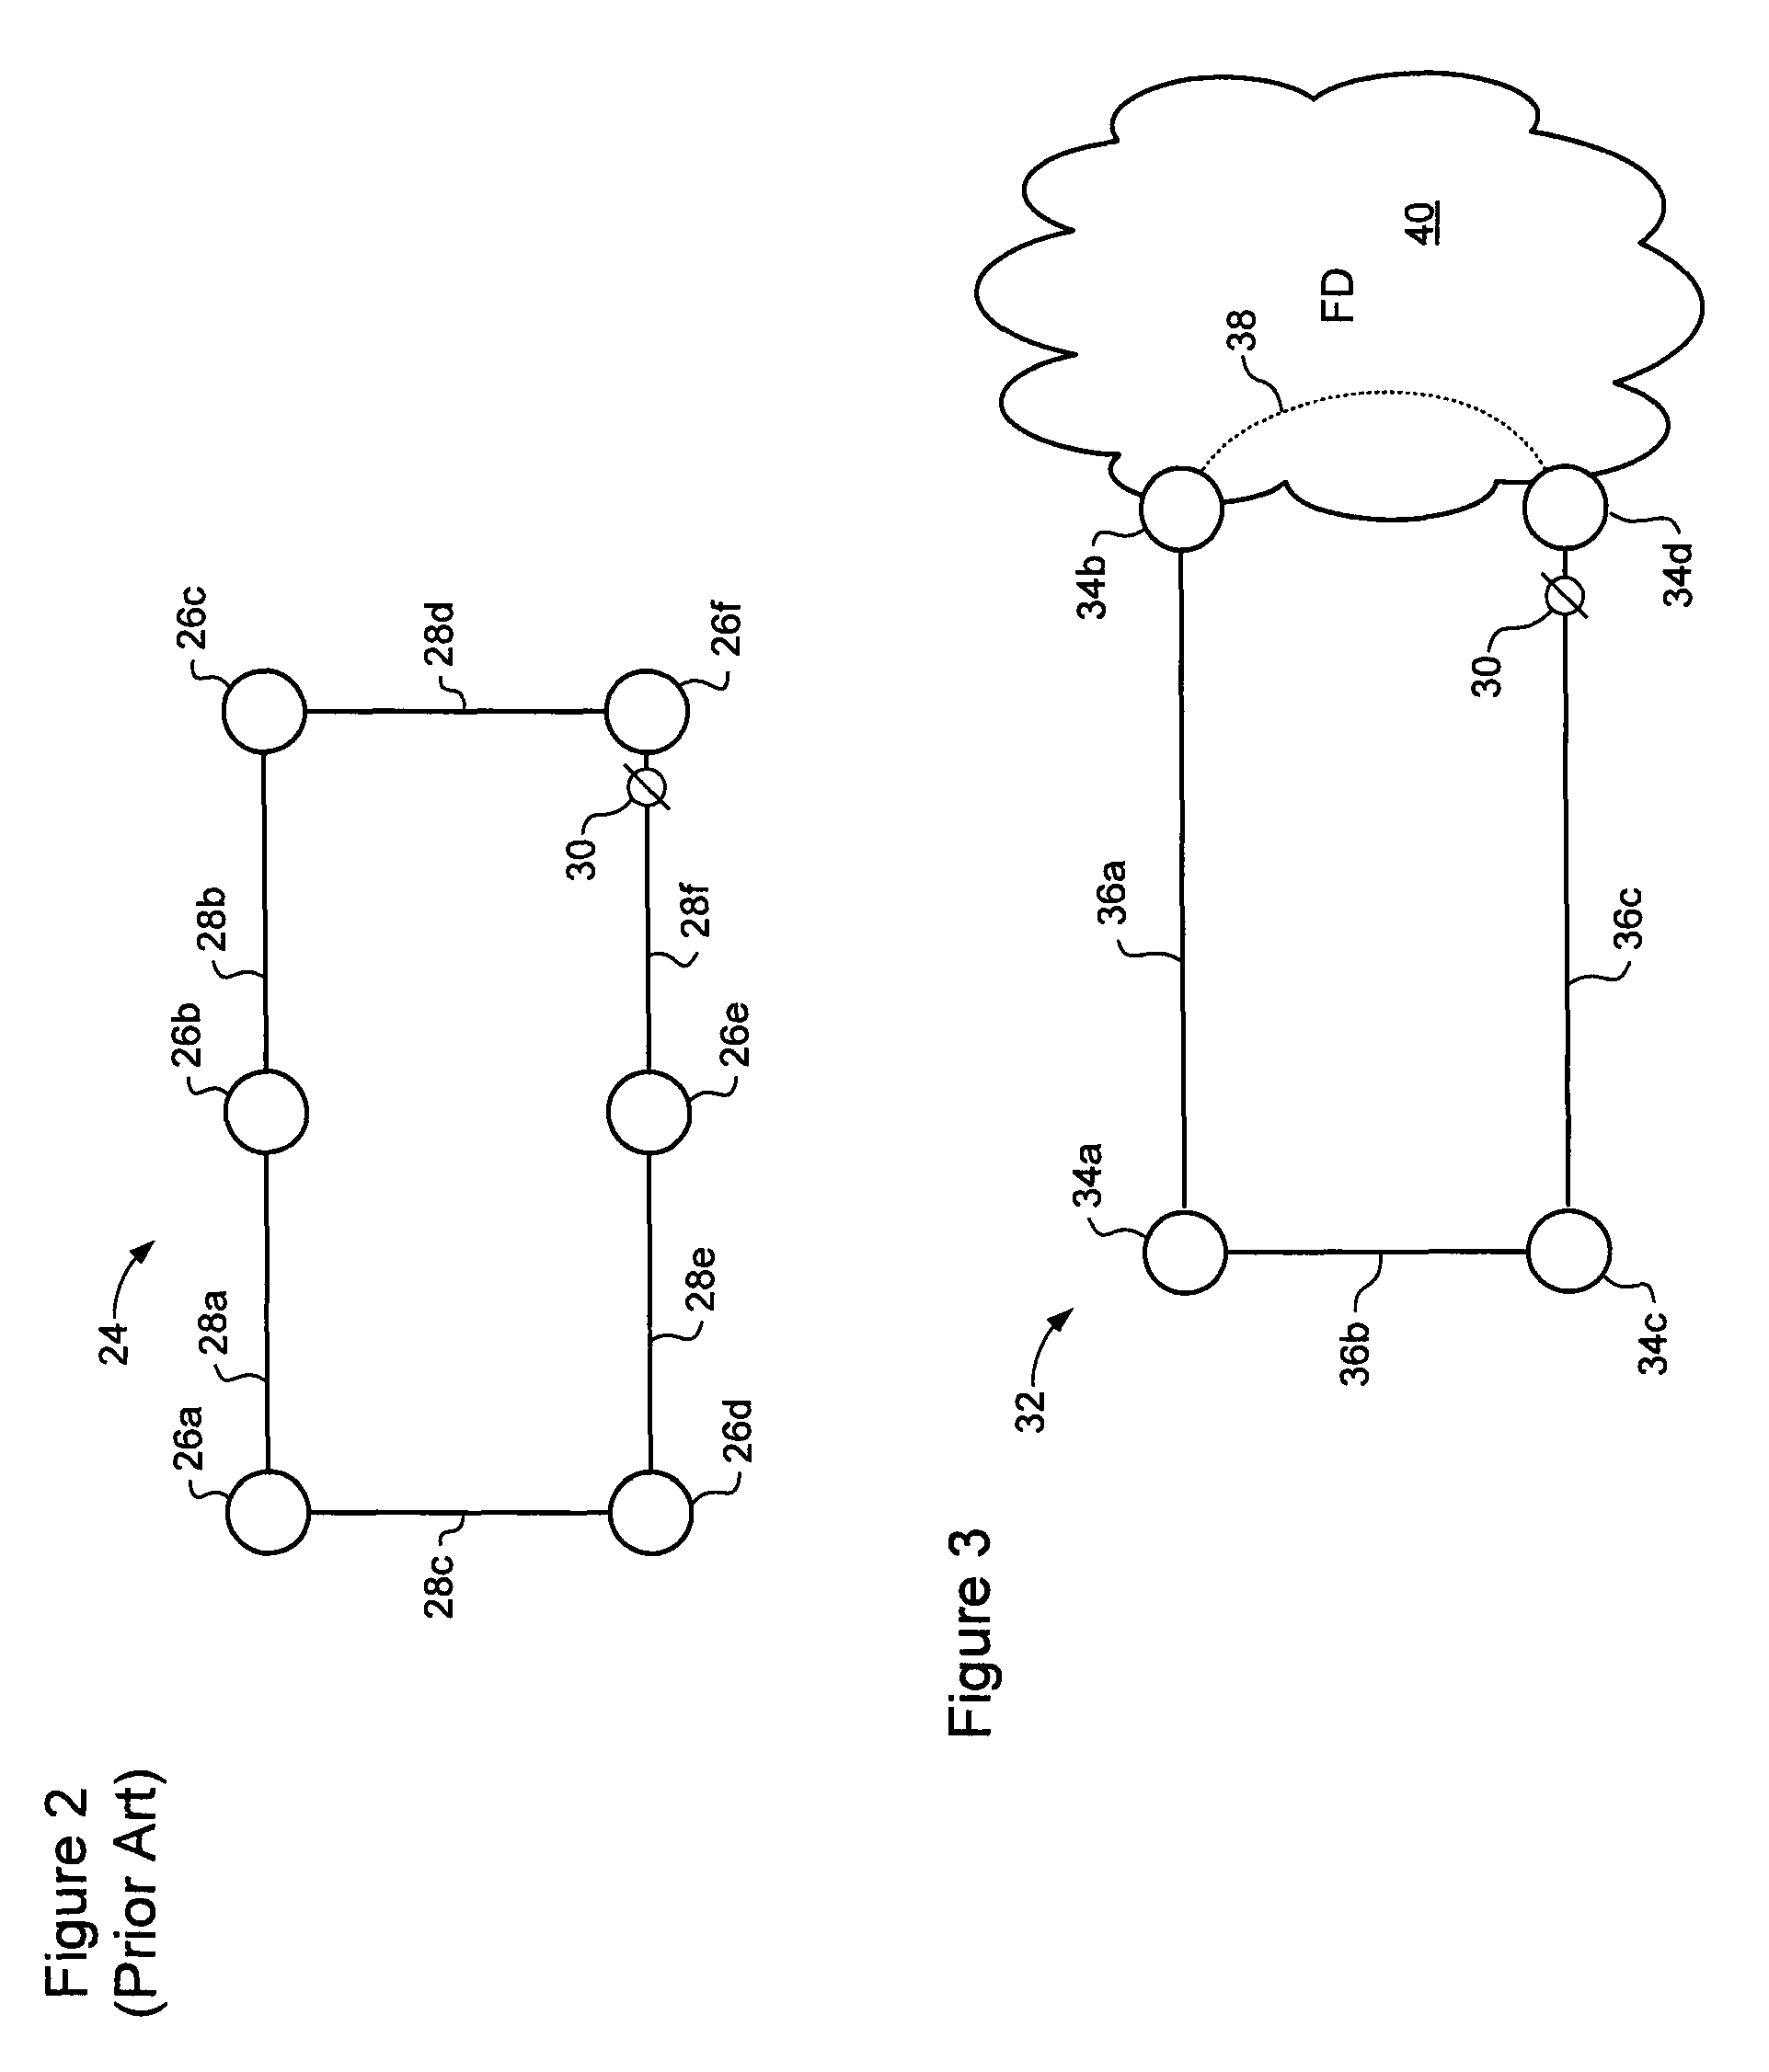 Dual homed E-spring protection for network domain interworking